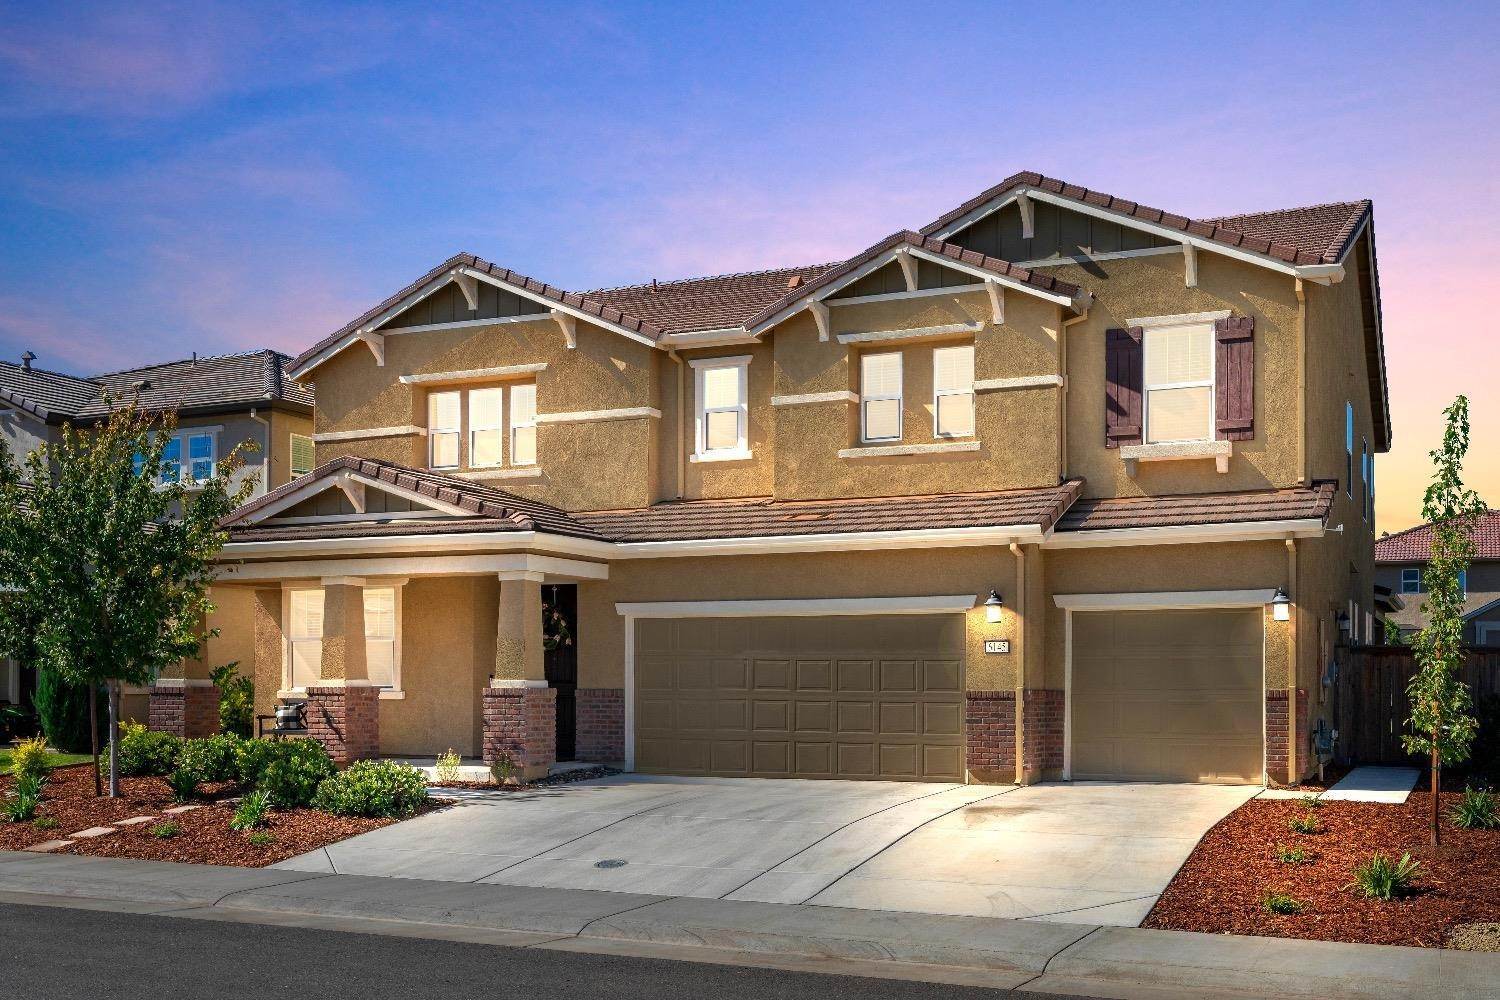 Single Family Homes for Active at 6145 Duet Way Roseville, California 95747 United States